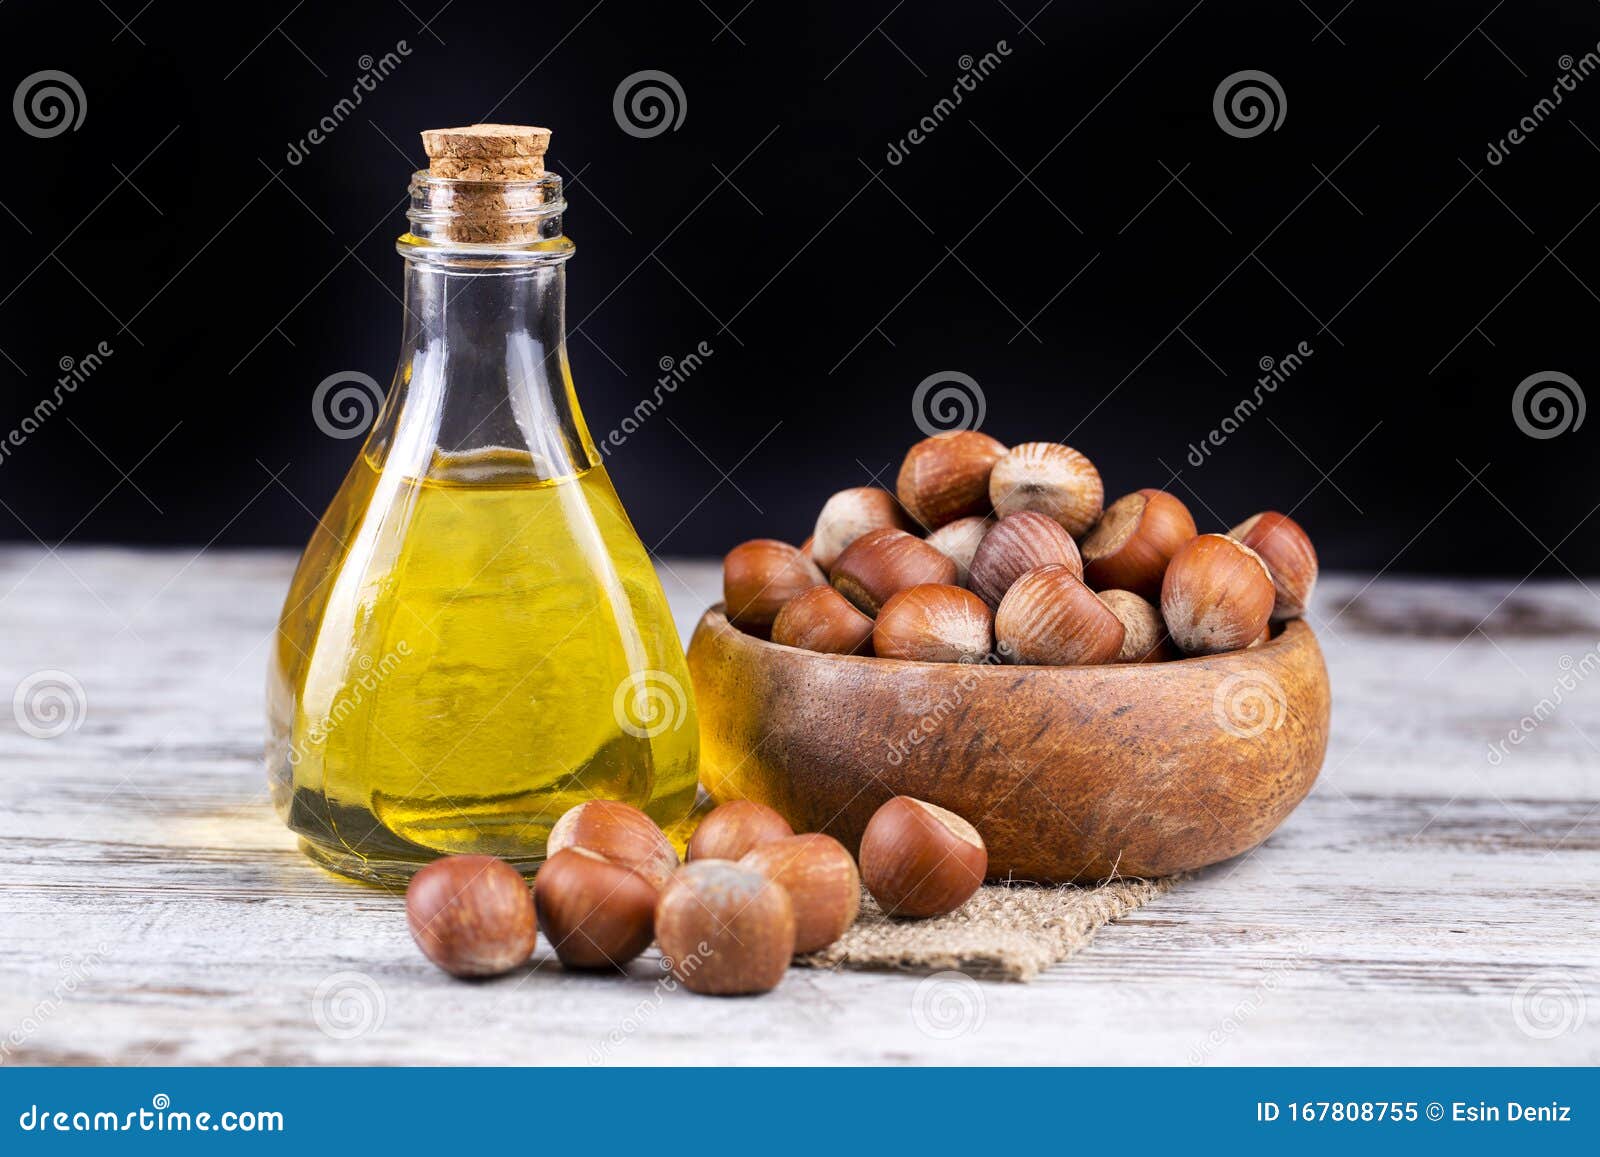 hazelnuts and hazelnut oil natural and healthy food